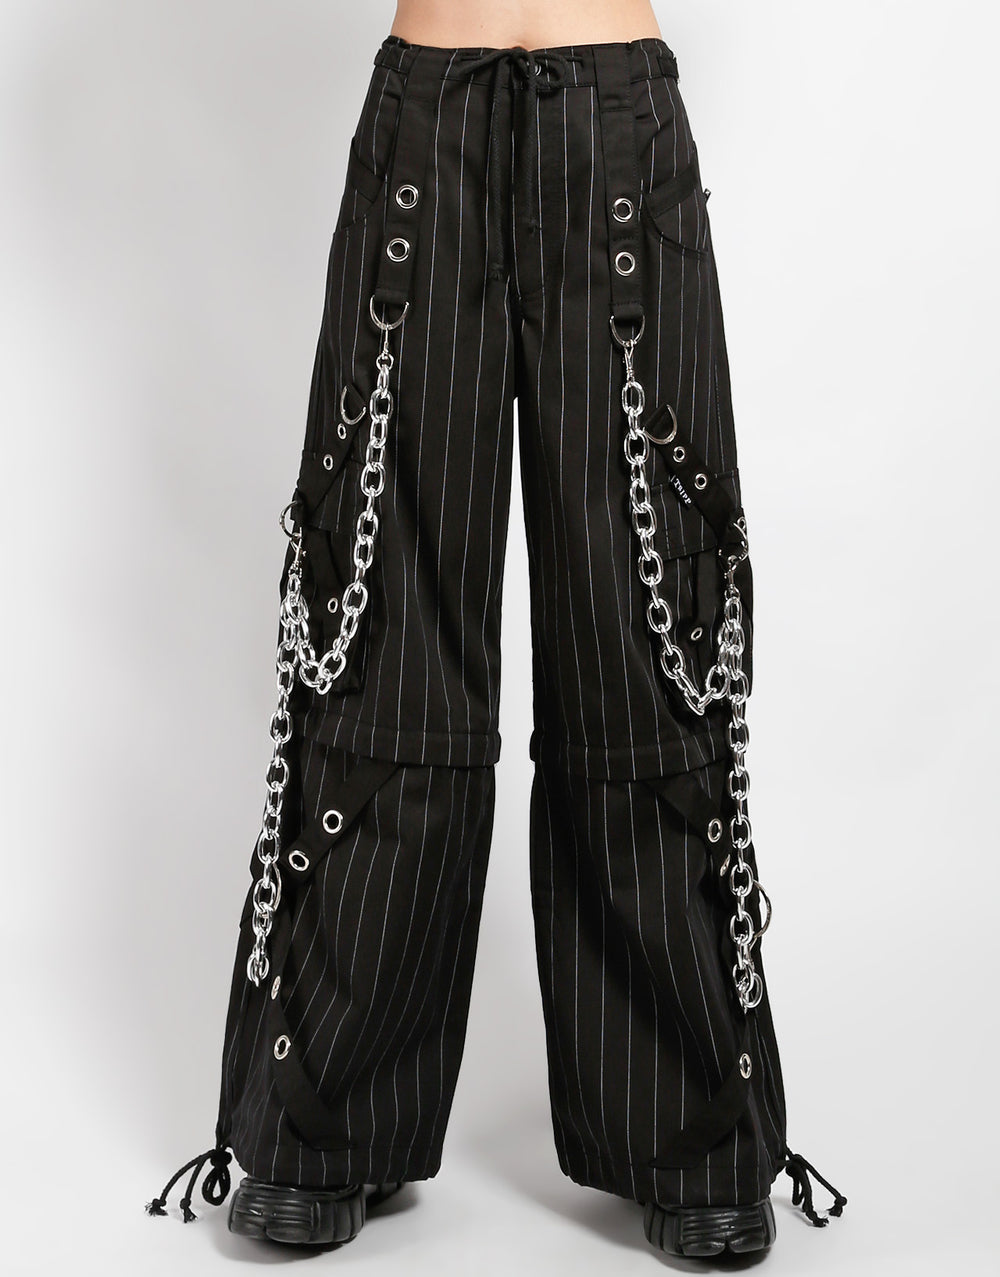 Emo Pants With Chains | RevXval Emo